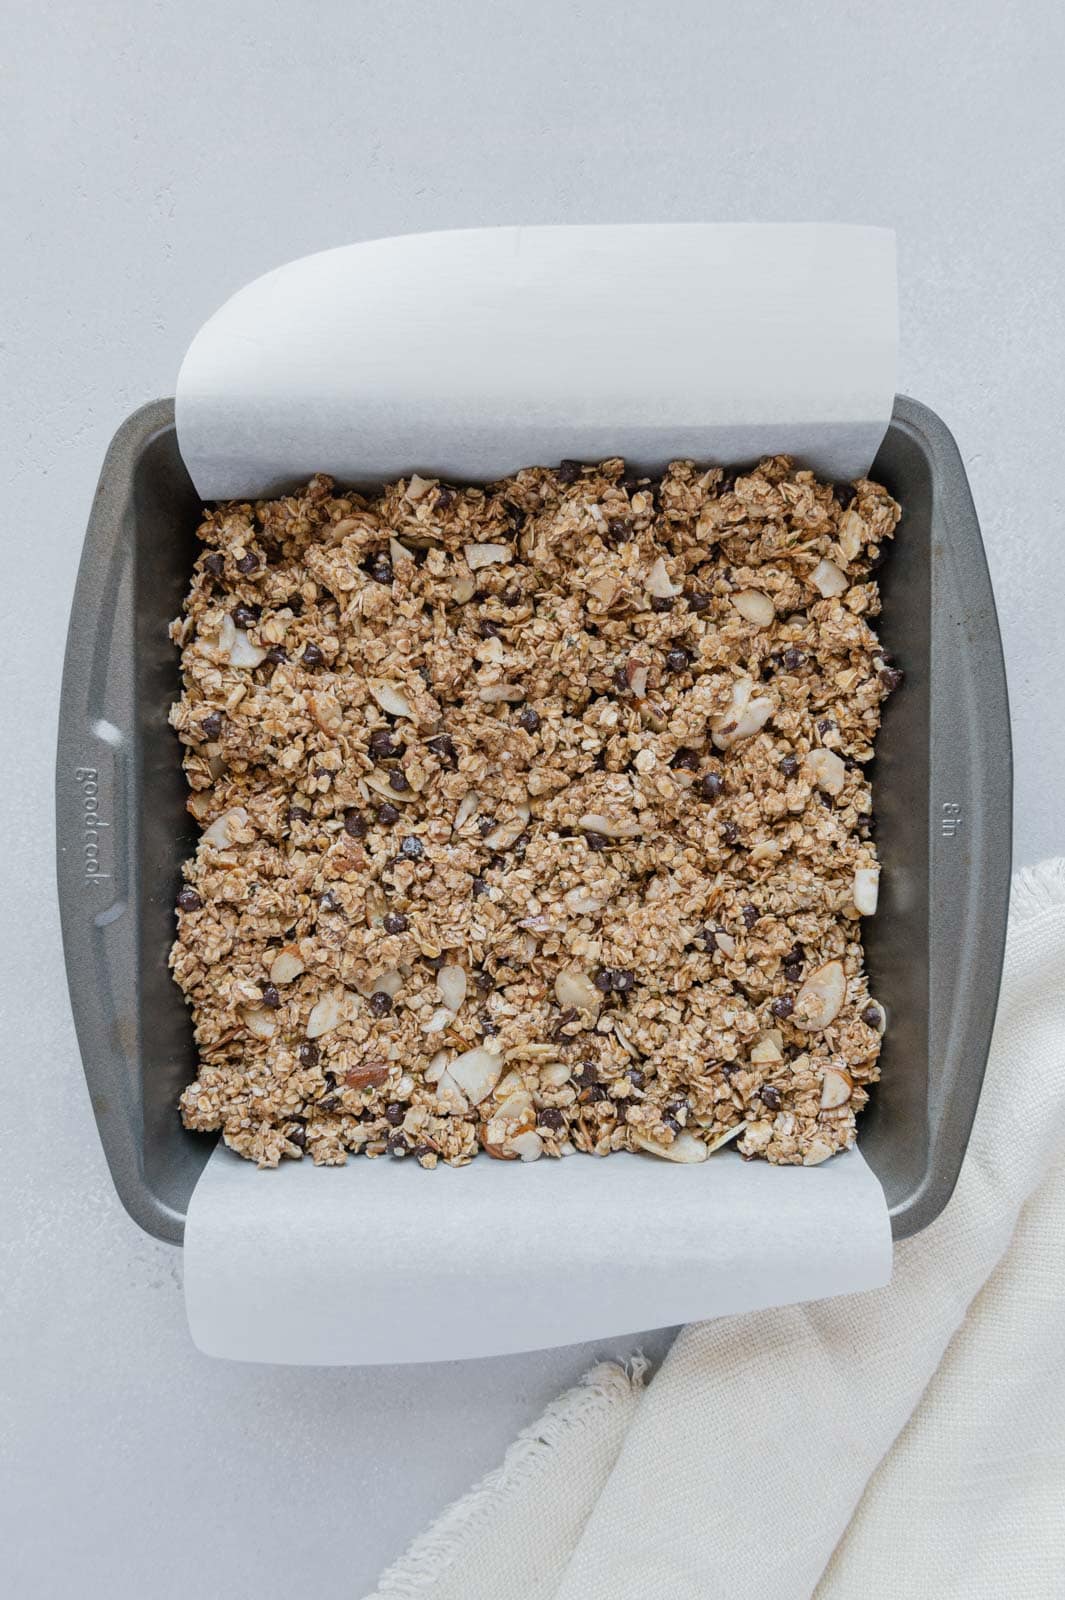 Granola bar mixture in an 8x8 baking pan lined with parchment paper.